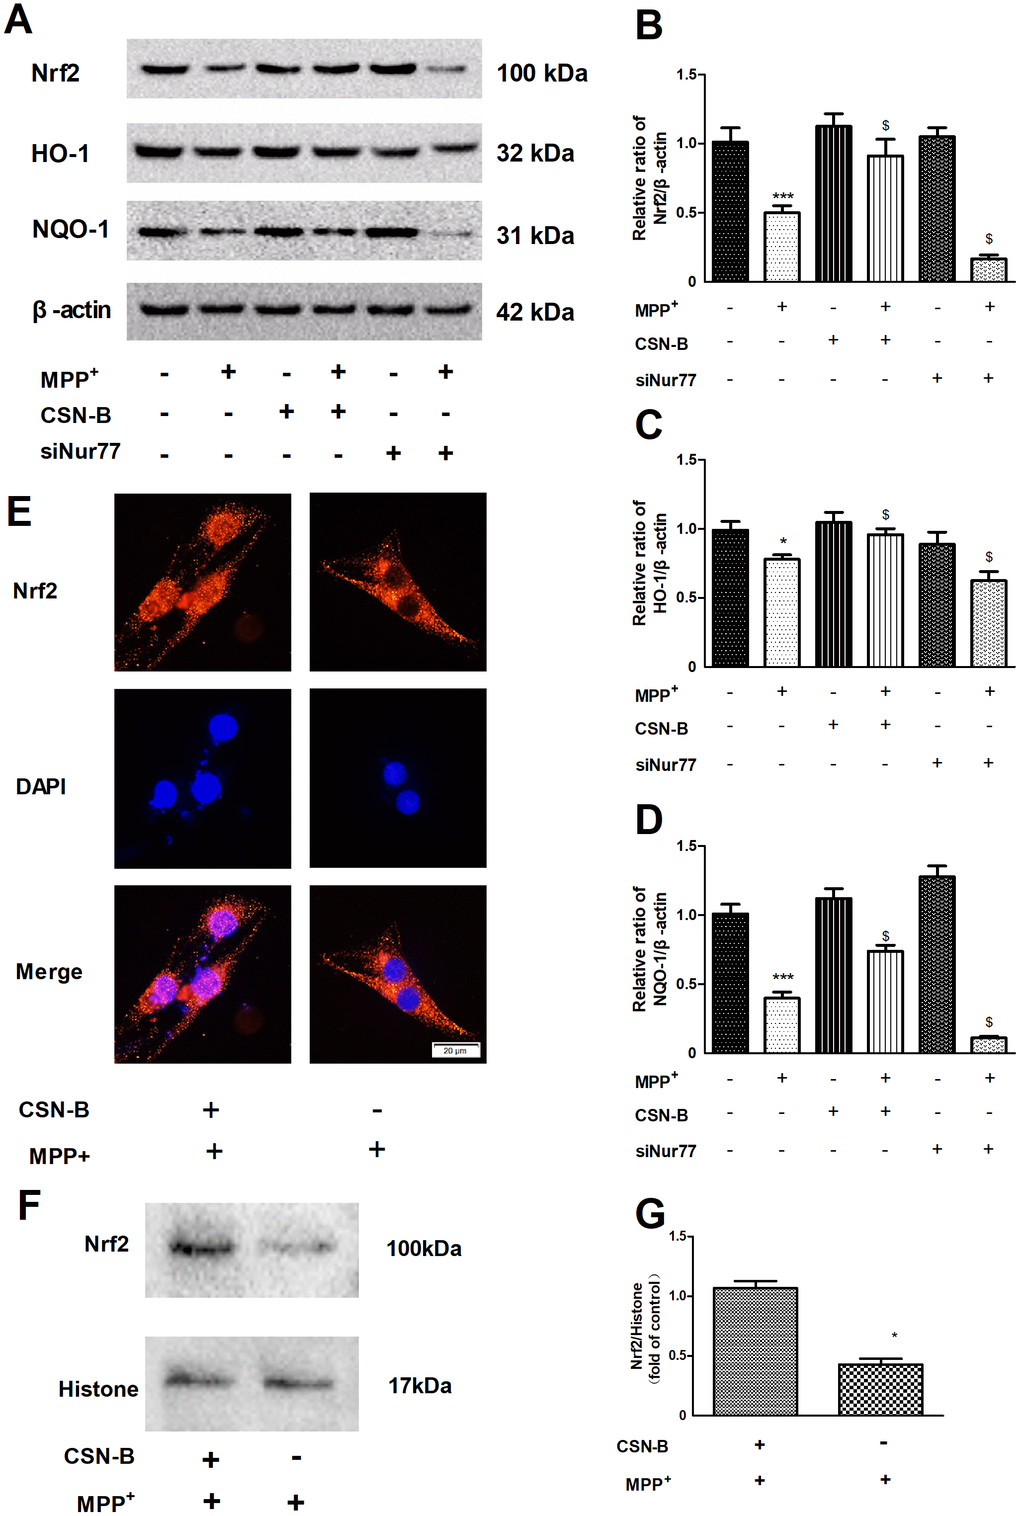 Regulation of the Nur77 on anti-oxidant stress. (A) CSN-B treatment significantly reversed the reduction of Nrf2 caused by MPP+, siNur77 transfection reduced the expression of Nrf2 under MPP+ stress. (B–D) CSN-B could significantly increase the expression of HO-1 and NQO-1, while Silencing of Nur77 with siRNA can significantly decrease HO-1 and NQO-1expression.(***P *P $P + group; n=3, mean +/- SEM). (E) Immunohistochemistry of Nrf2 in PC12 cells after CSN-B treatment. (F, G) Protein expression and Quantitative analysis of Nrf2 in PC12 cell nucleus.